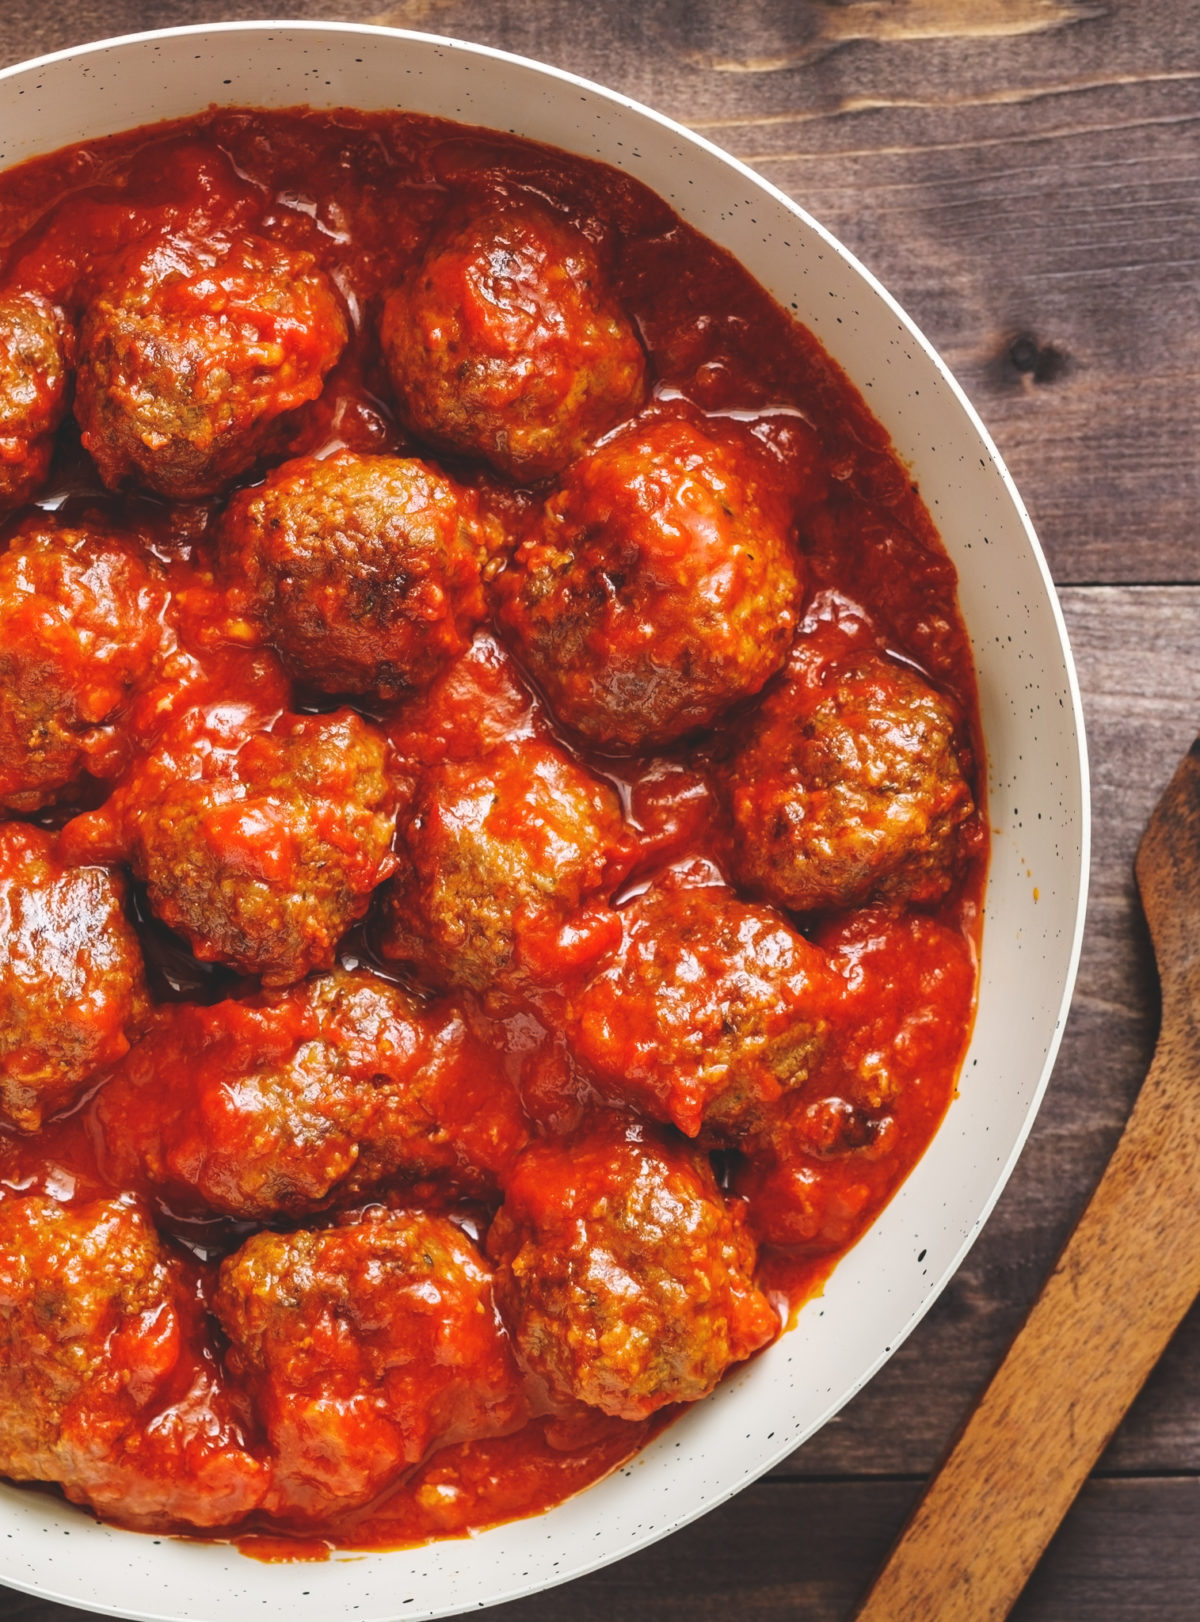 10 Marvelous Meatball Recipes To Make Everyone Happy - Once Upon a Chef